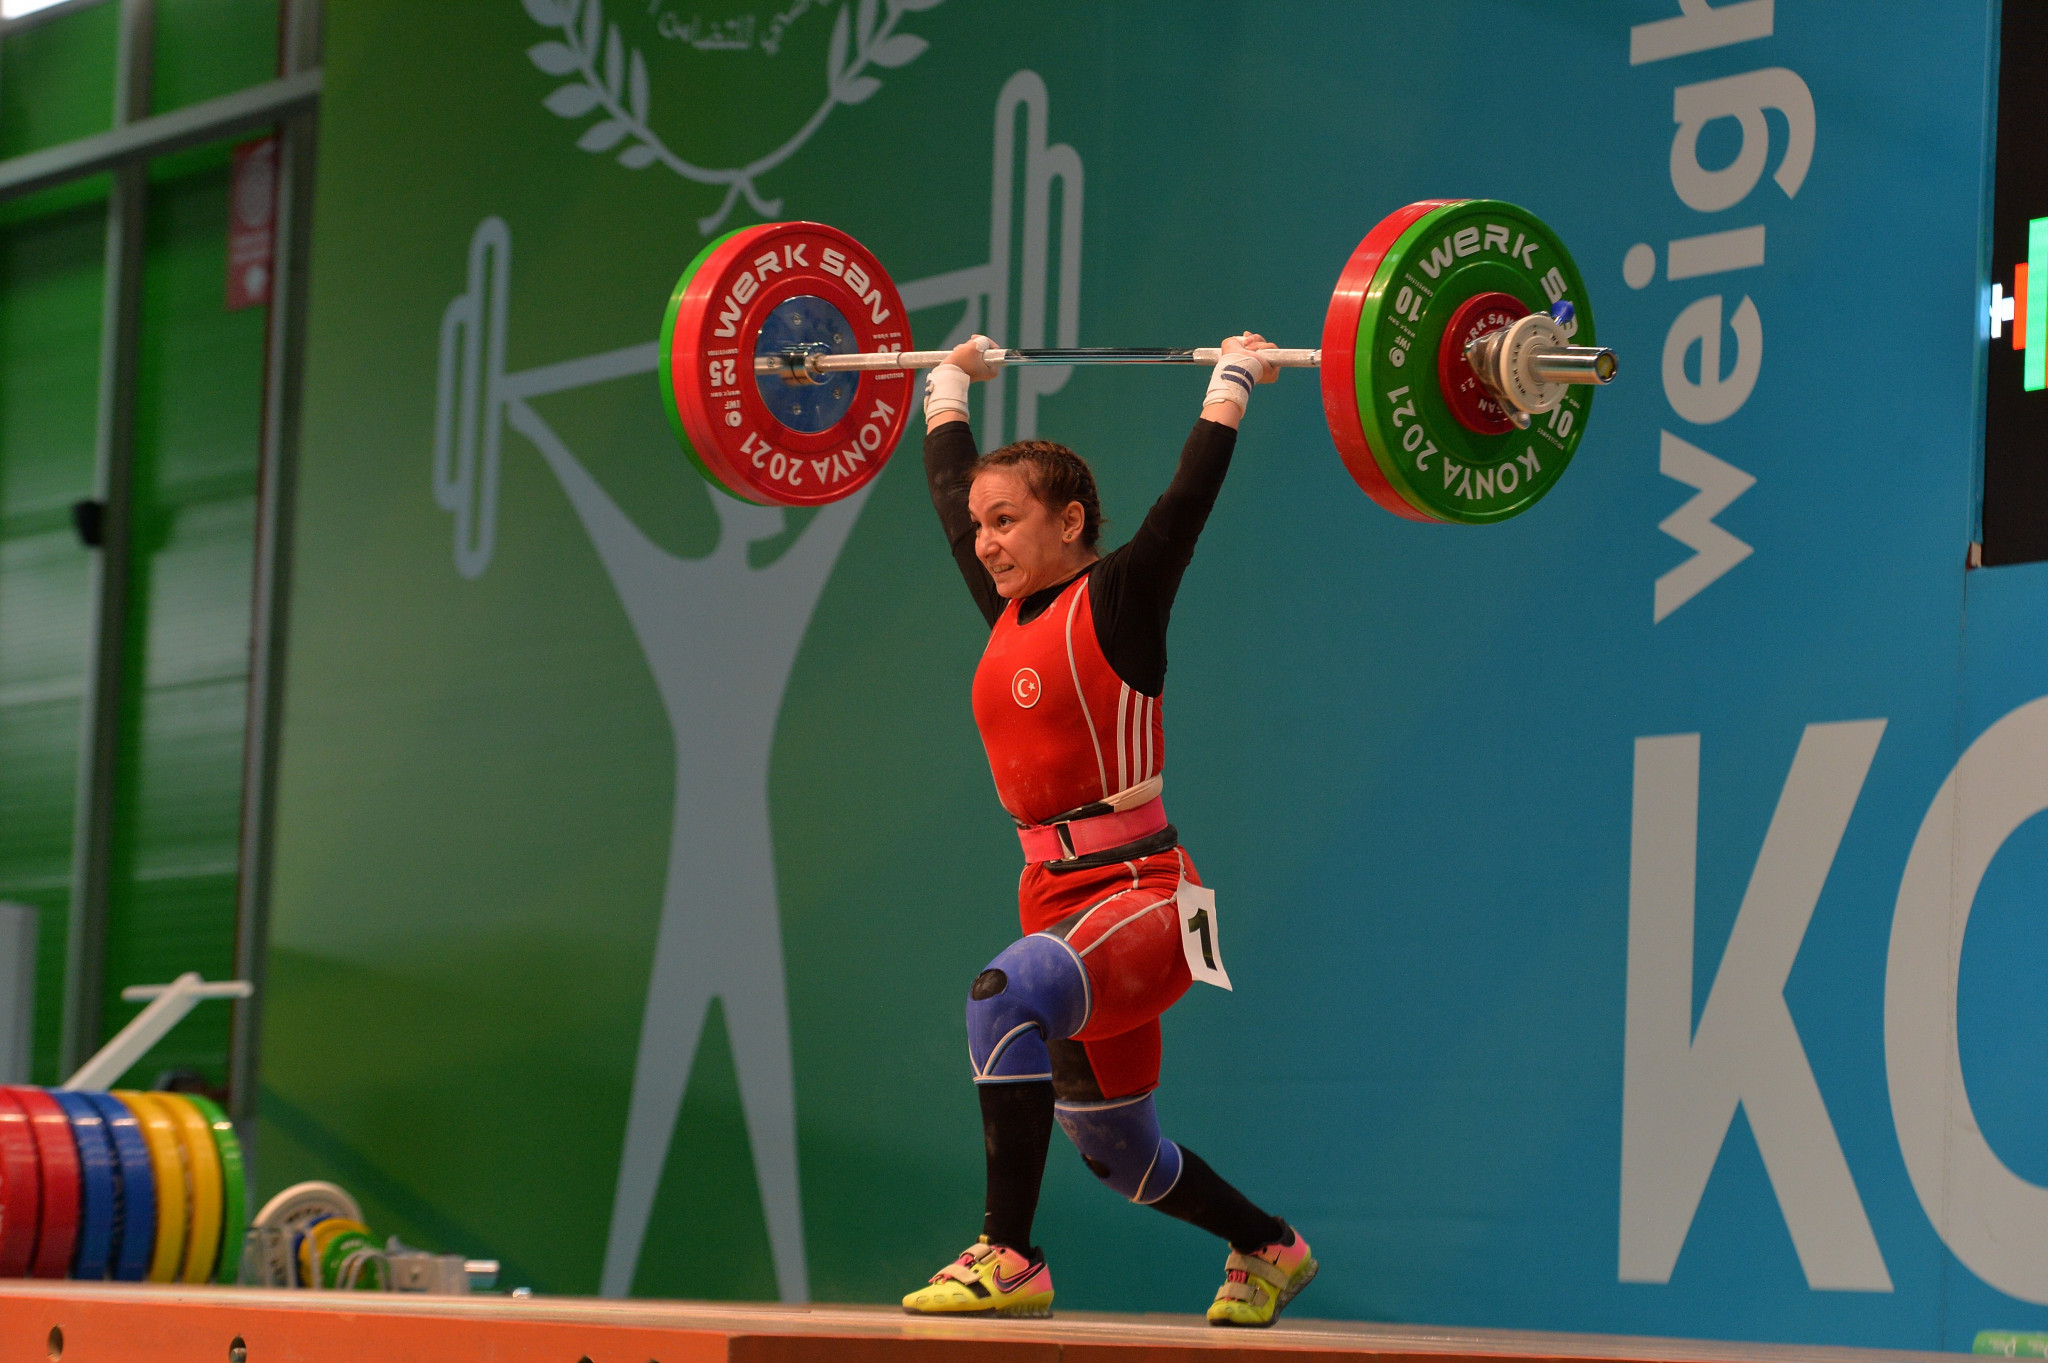 Weighlifting was among a number of competitions that were held in Konya ©Konya 2021